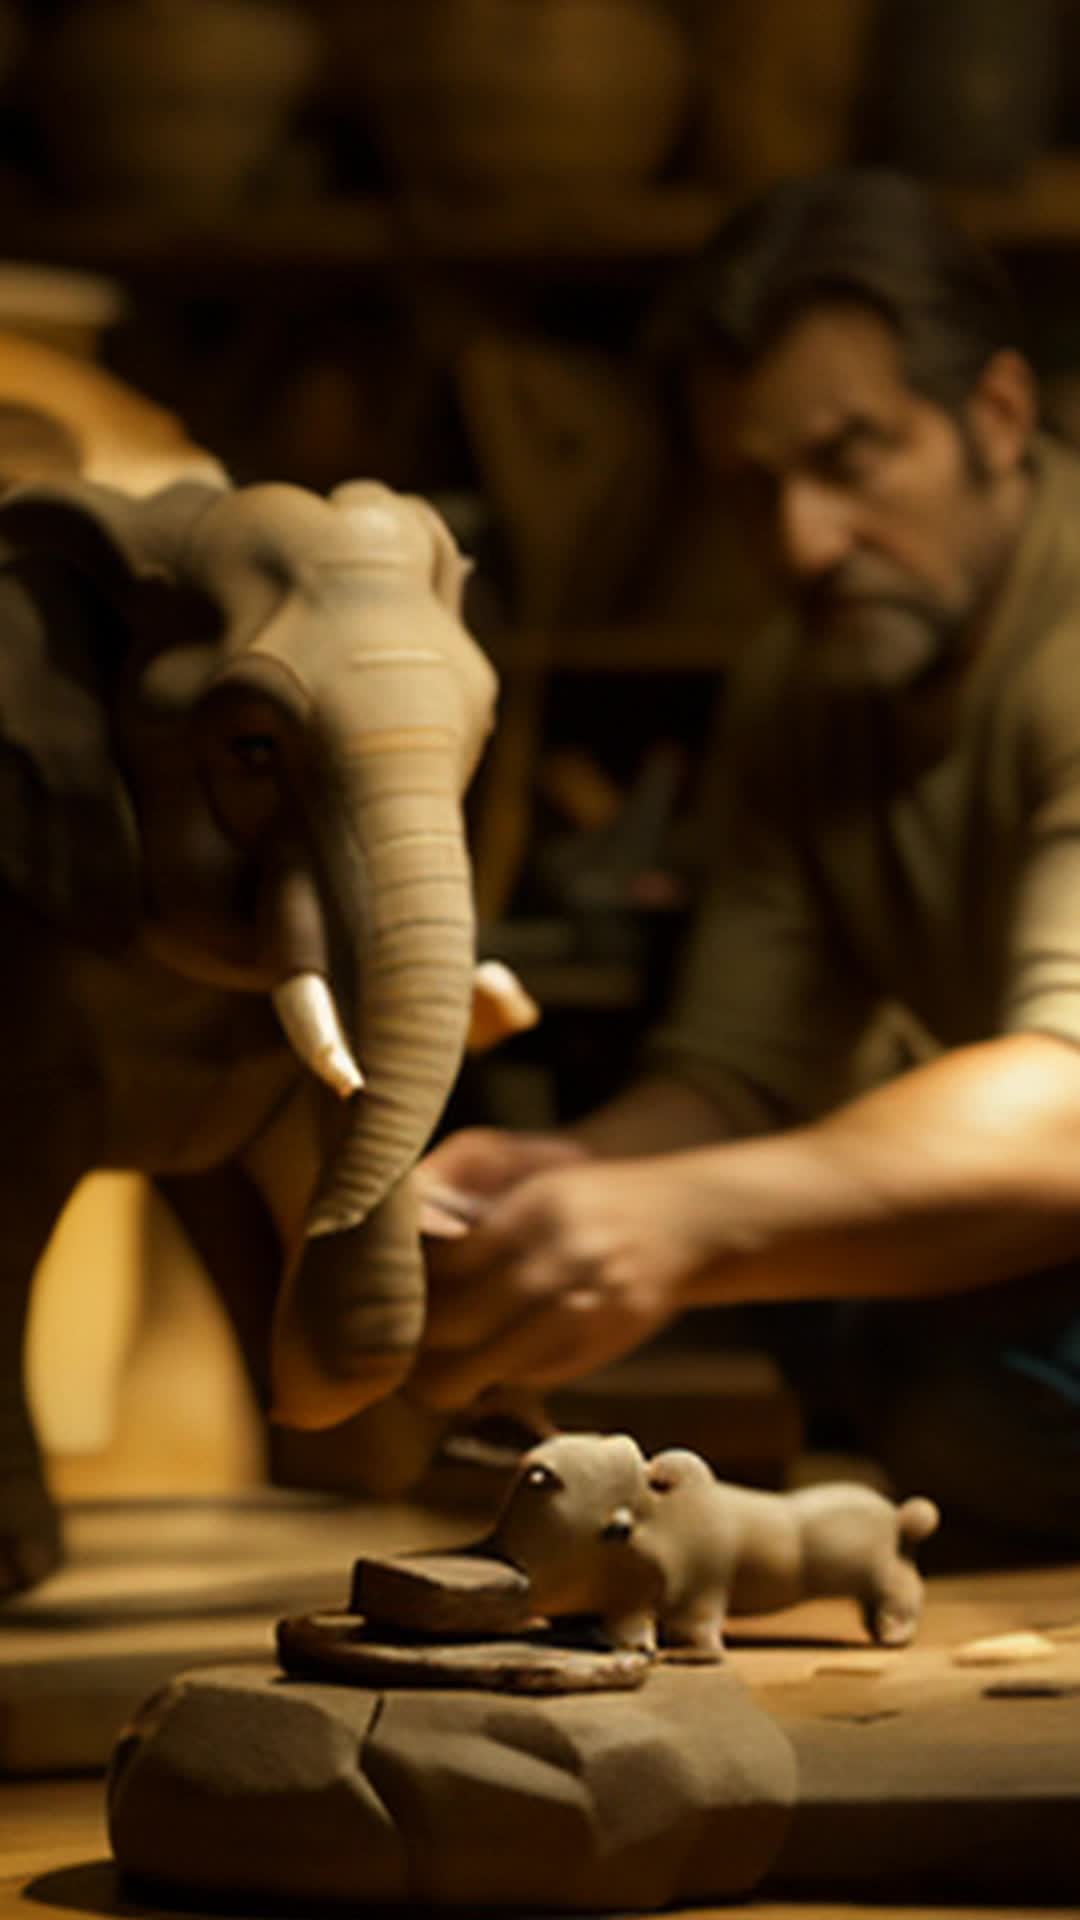 Clay elephant taking shape, Jamal’s hands meticulous, scene of creation, warmth of studio lighting, soft shadows enveloping workspace, hands in motion, vitality of artistic process, detailed backdrop of sculpting tools